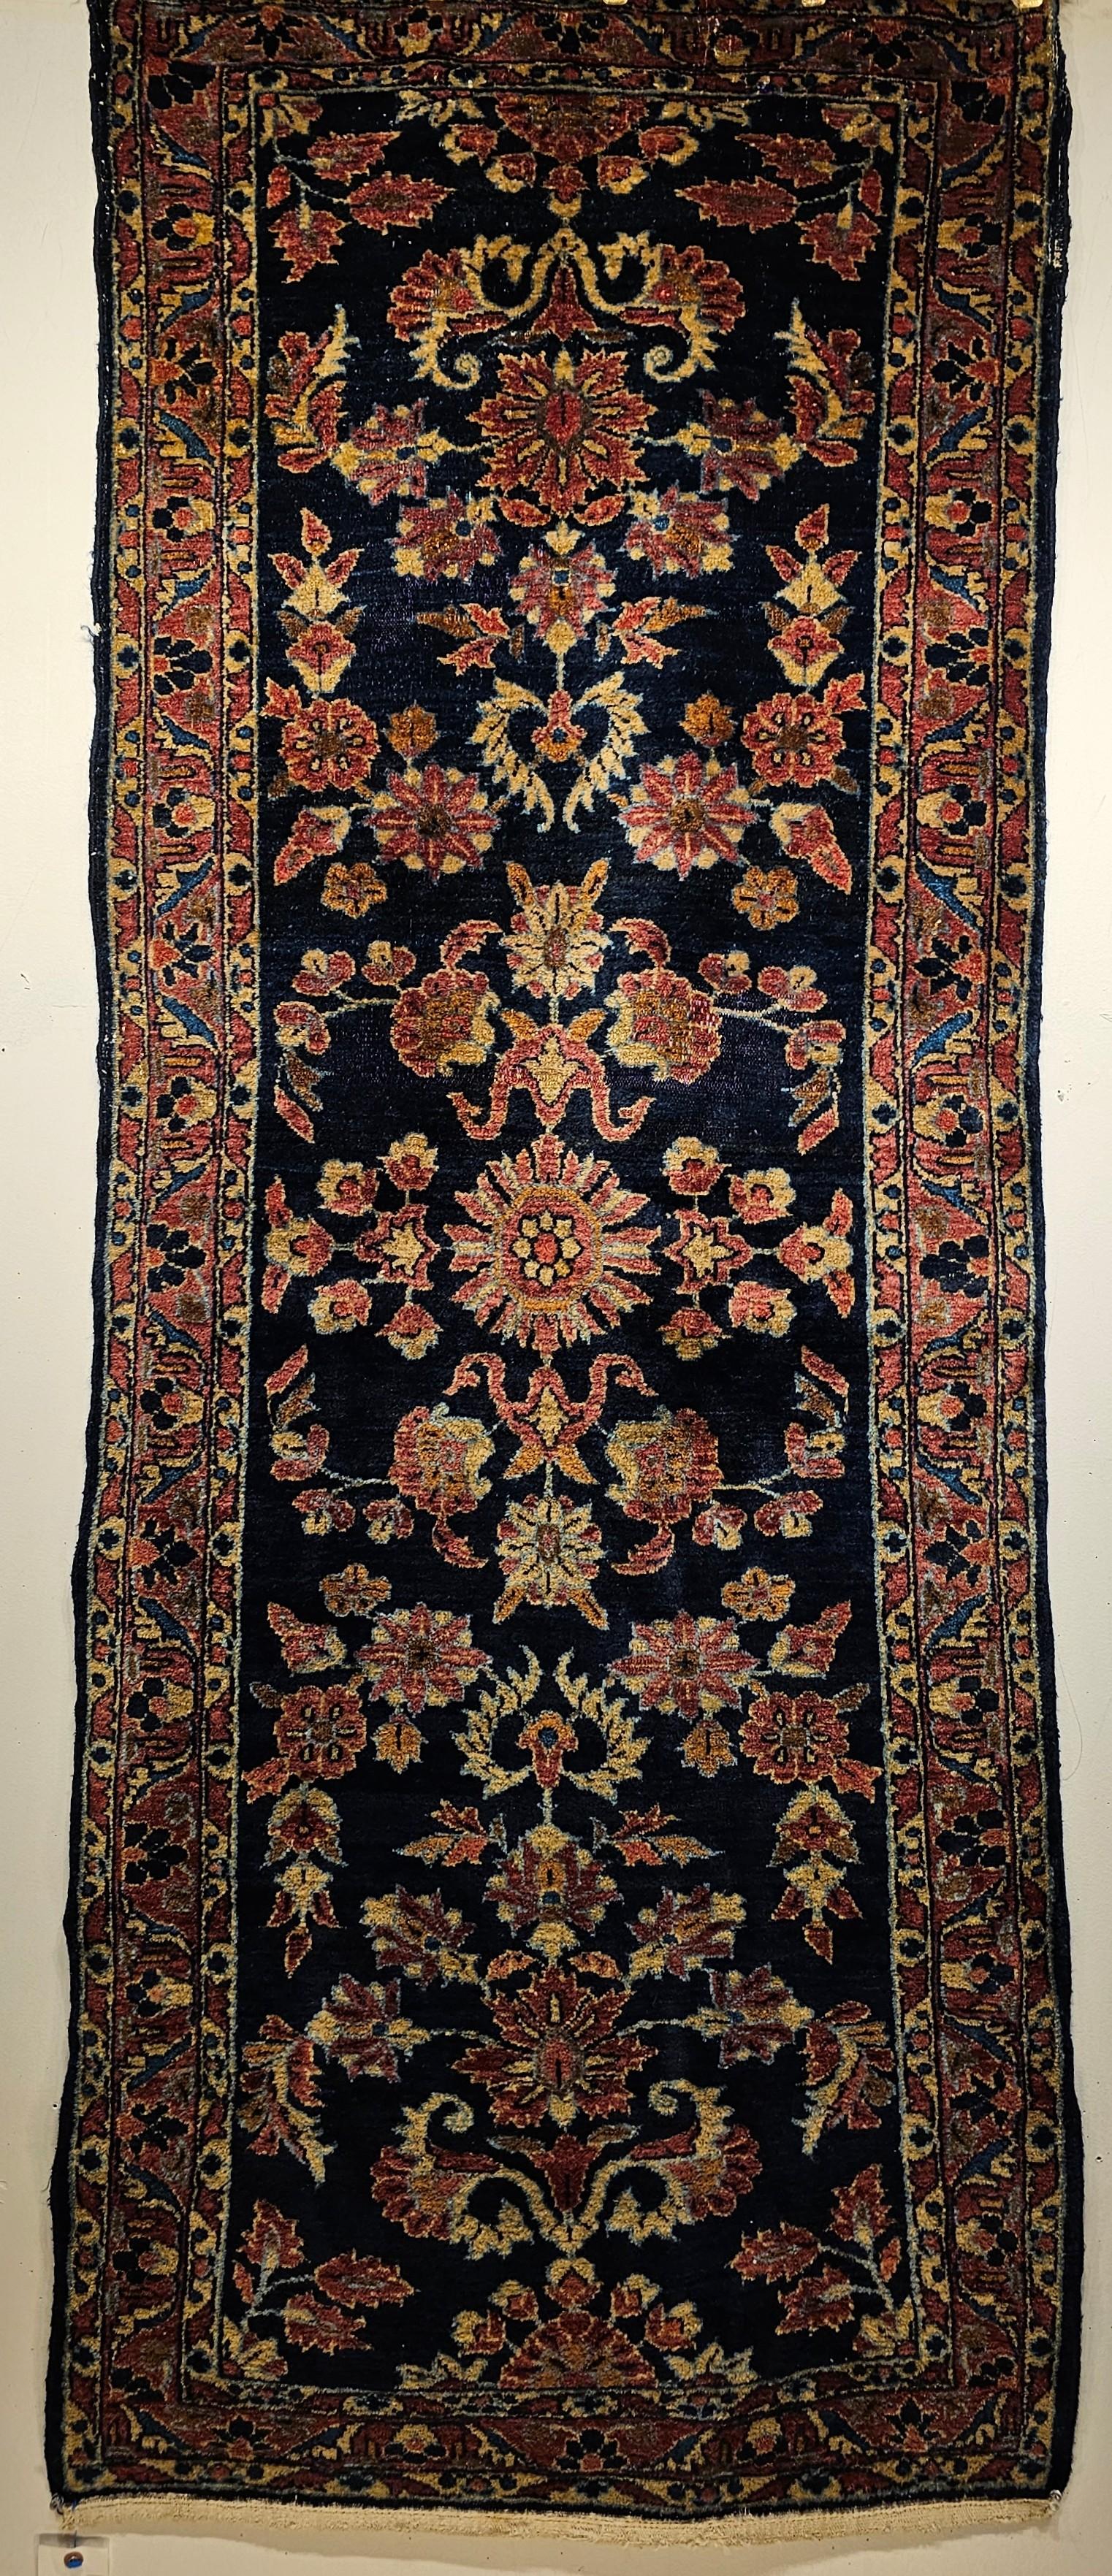 An early 1900s Persian Lilian Runner in an Allover Floral Design in abrash navy blue.  The Lilian runner has an all-over floral pattern set in an abrash navy blue field.  The flowers have beautiful shades of green, blue, red, and pink bringing